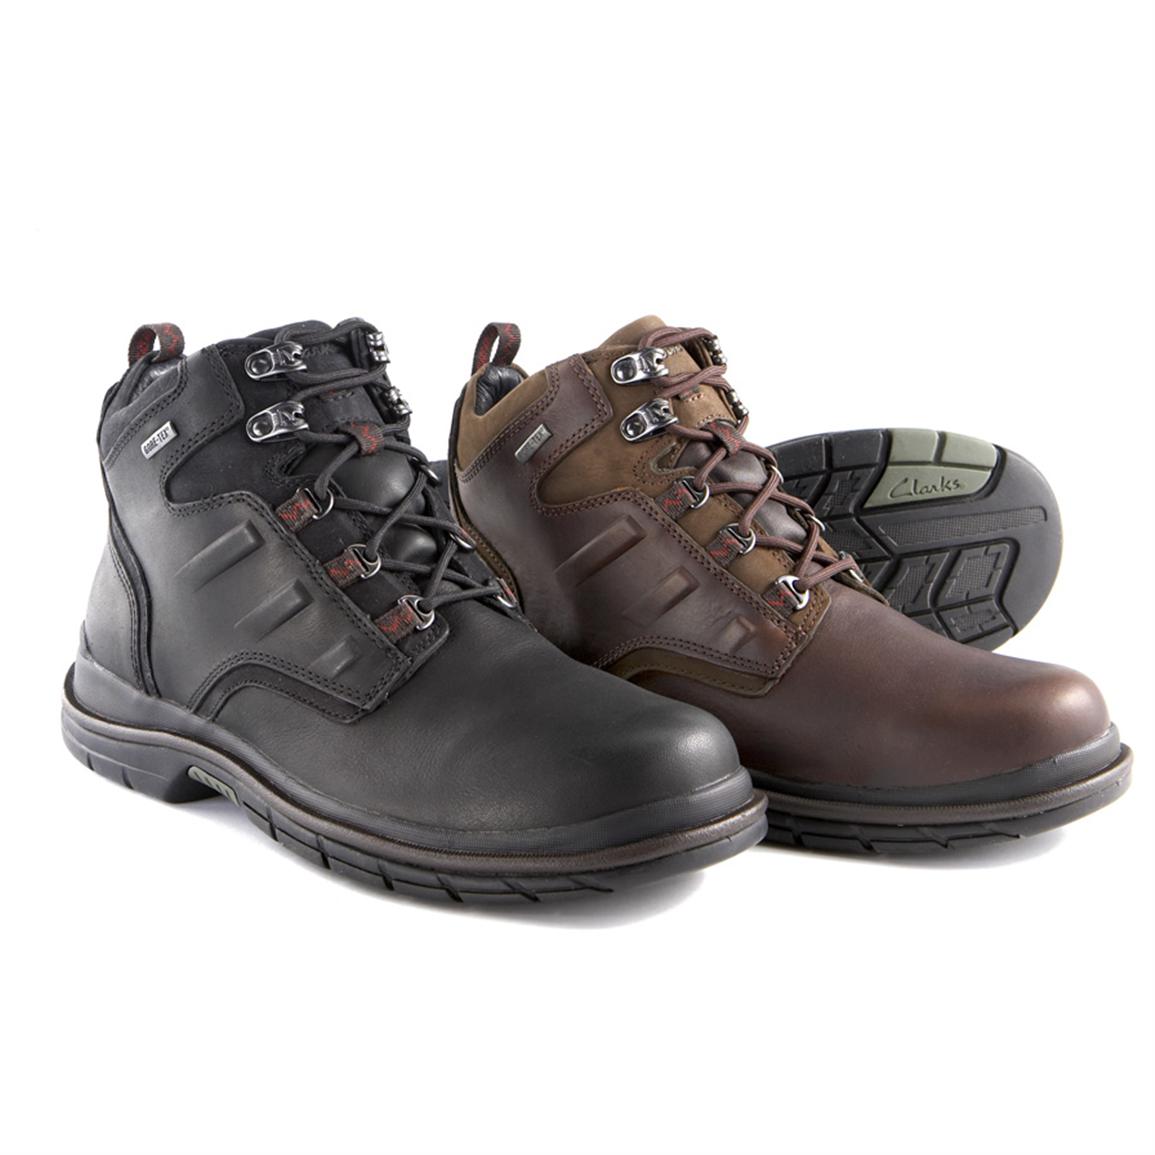 Men's Clarks® Ash Boots - 126777, Casual Shoes at Sportsman's Guide